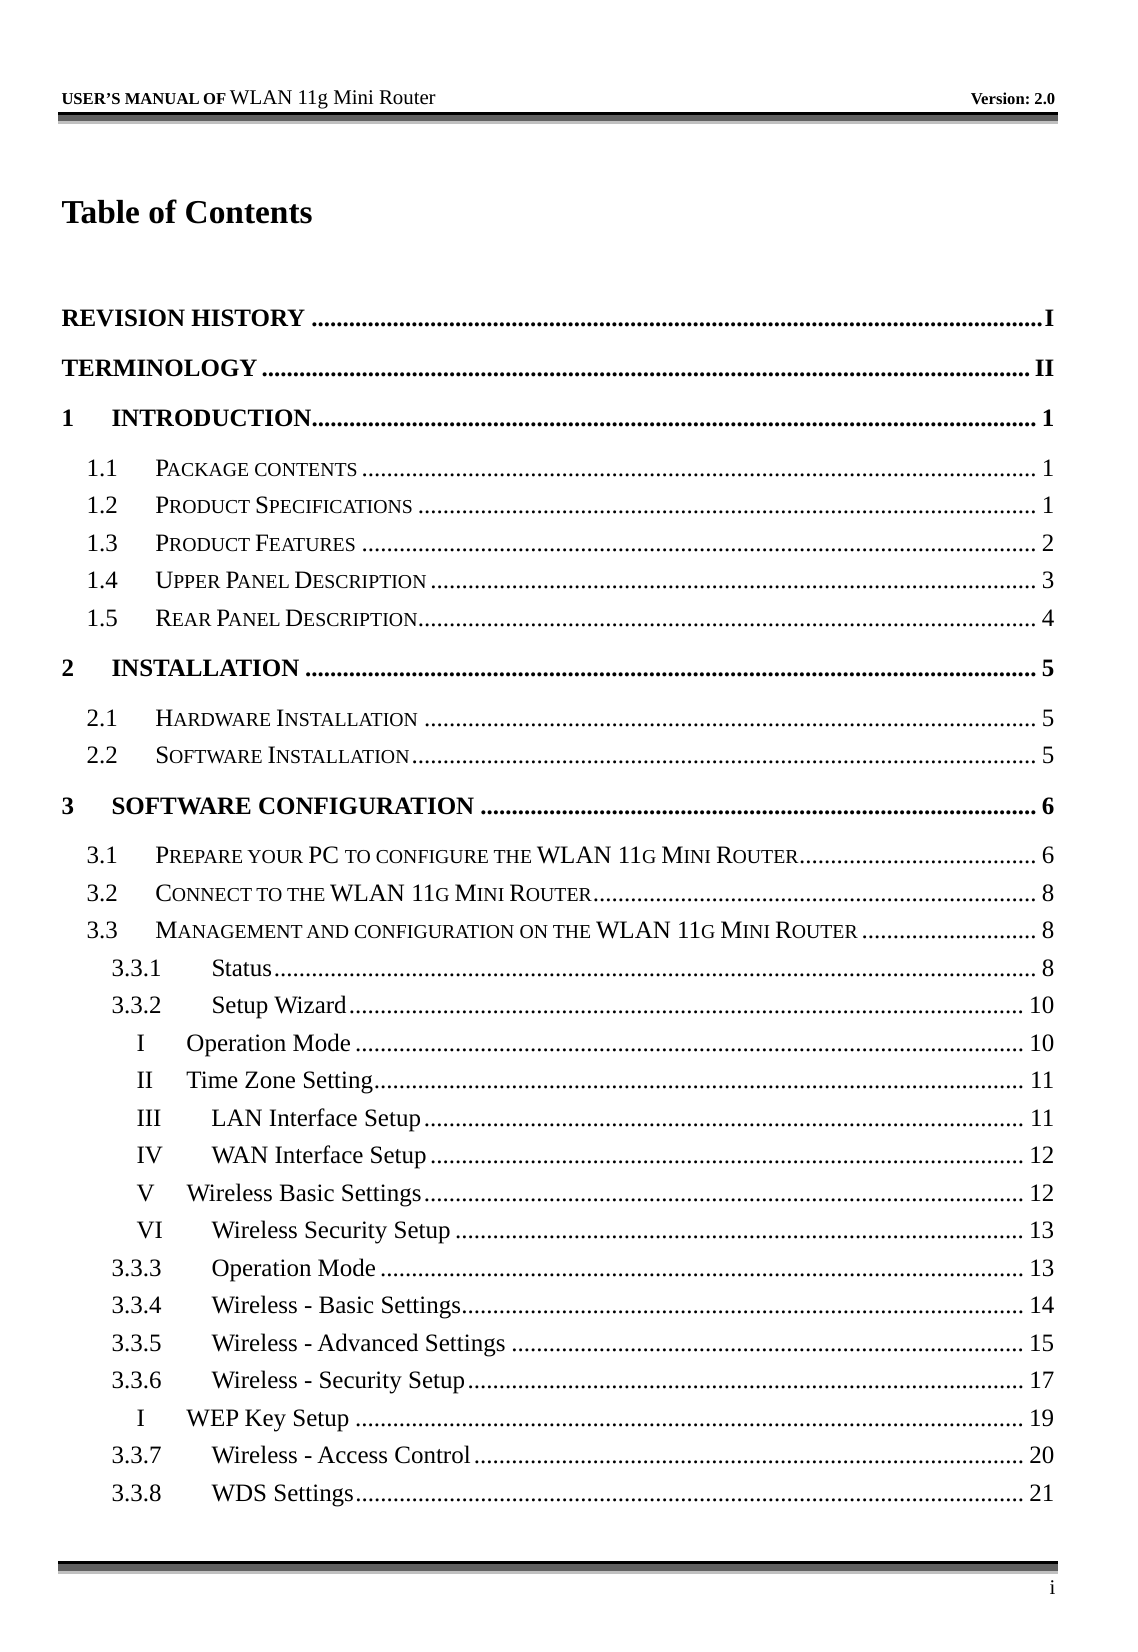   USER’S MANUAL OF WLAN 11g Mini Router   Version: 2.0     i  Table of Contents  REVISION HISTORY .....................................................................................................................I TERMINOLOGY ........................................................................................................................... II 1 INTRODUCTION....................................................................................................................1 1.1 PACKAGE CONTENTS ............................................................................................................ 1 1.2 PRODUCT SPECIFICATIONS ................................................................................................... 1 1.3 PRODUCT FEATURES ............................................................................................................ 2 1.4 UPPER PANEL DESCRIPTION ................................................................................................. 3 1.5 REAR PANEL DESCRIPTION................................................................................................... 4 2 INSTALLATION ..................................................................................................................... 5 2.1 HARDWARE INSTALLATION .................................................................................................. 5 2.2 SOFTWARE INSTALLATION.................................................................................................... 5 3 SOFTWARE CONFIGURATION ......................................................................................... 6 3.1 PREPARE YOUR PC TO CONFIGURE THE WLAN 11G MINI ROUTER...................................... 6 3.2 CONNECT TO THE WLAN 11G MINI ROUTER....................................................................... 8 3.3 MANAGEMENT AND CONFIGURATION ON THE WLAN 11G MINI ROUTER ............................ 8 3.3.1 Status.......................................................................................................................... 8 3.3.2 Setup Wizard............................................................................................................ 10 I Operation Mode ........................................................................................................... 10 II Time Zone Setting........................................................................................................ 11 III  LAN Interface Setup................................................................................................ 11 IV  WAN Interface Setup............................................................................................... 12 V  Wireless Basic Settings................................................................................................ 12 VI  Wireless Security Setup ........................................................................................... 13 3.3.3 Operation Mode ....................................................................................................... 13 3.3.4  Wireless - Basic Settings.......................................................................................... 14 3.3.5  Wireless - Advanced Settings .................................................................................. 15 3.3.6  Wireless - Security Setup......................................................................................... 17 I  WEP Key Setup ........................................................................................................... 19 3.3.7  Wireless - Access Control........................................................................................ 20 3.3.8 WDS Settings........................................................................................................... 21 